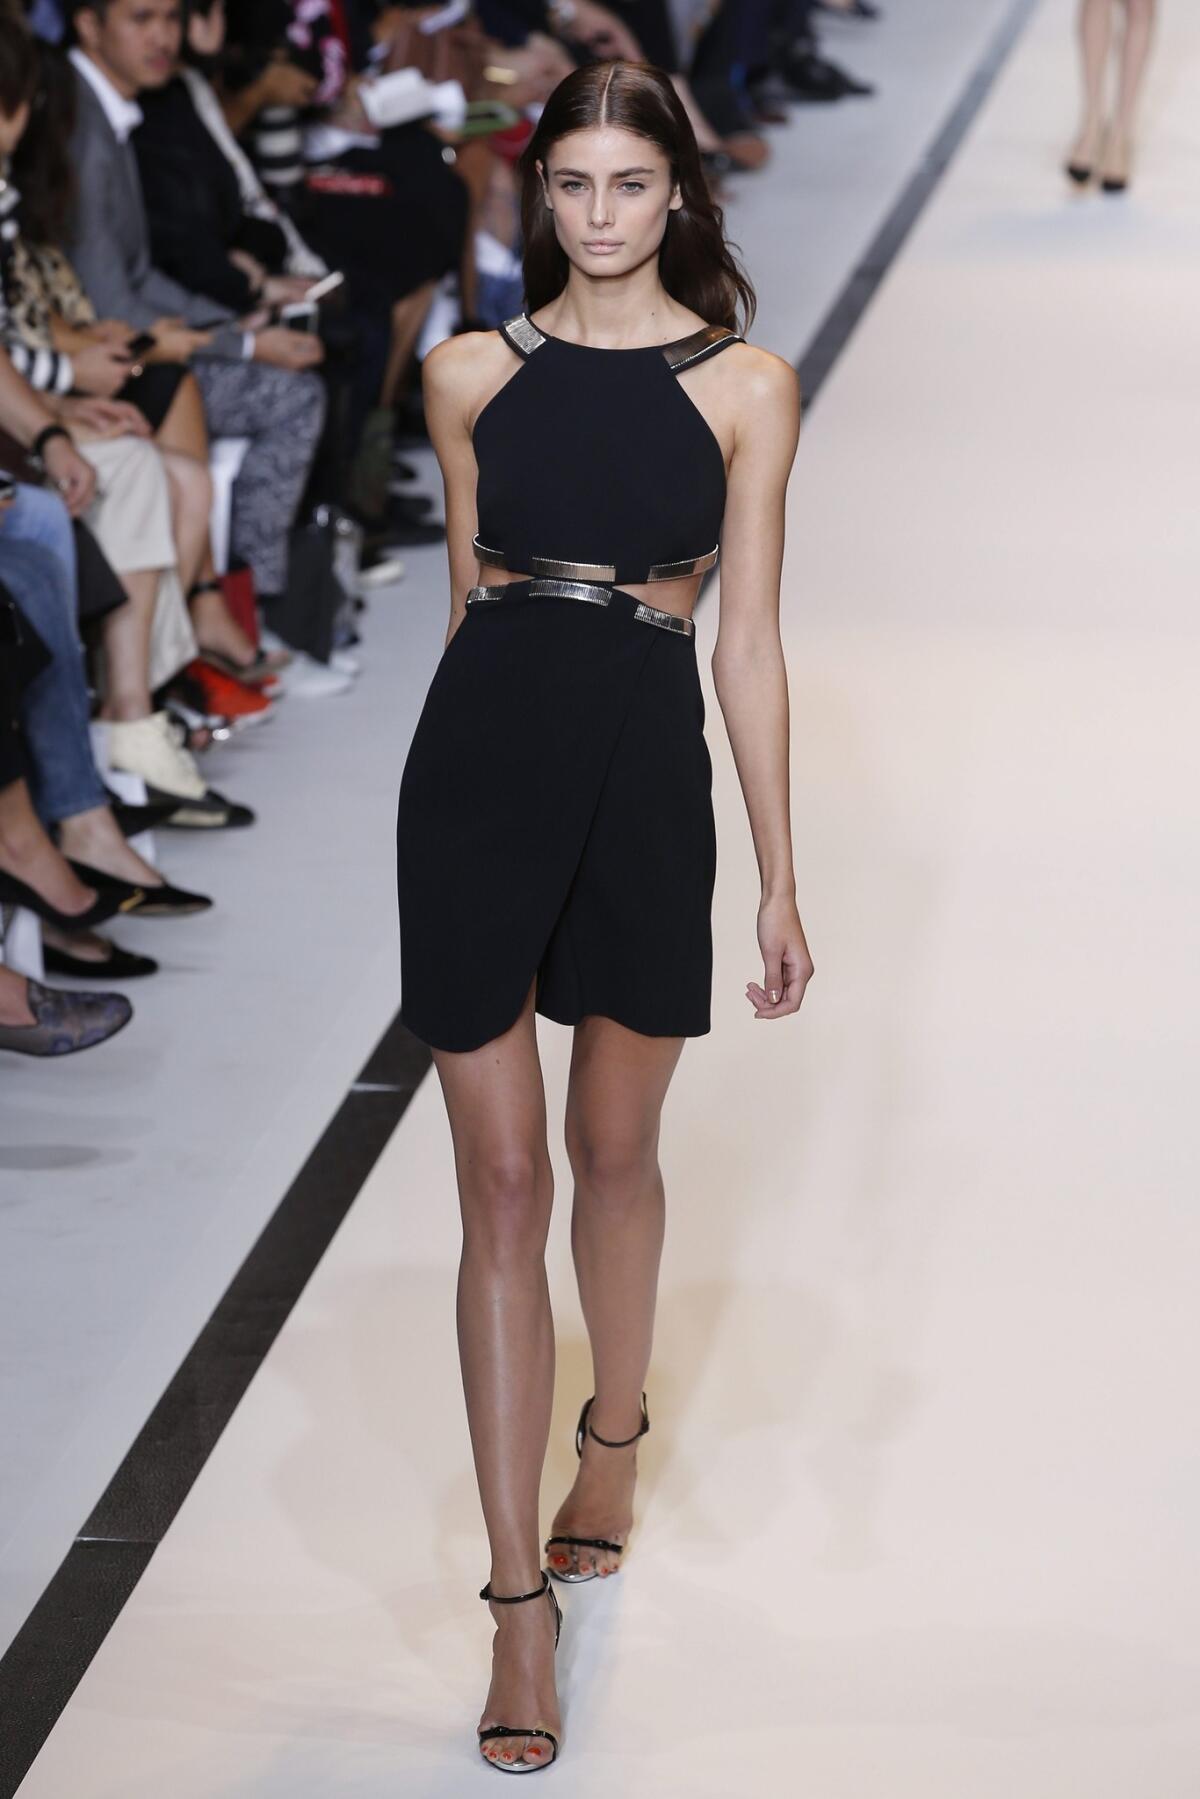 Creations for Mugler's Spring/Summer 2015 ready-to-wear fashion collection presented Saturday in Paris.